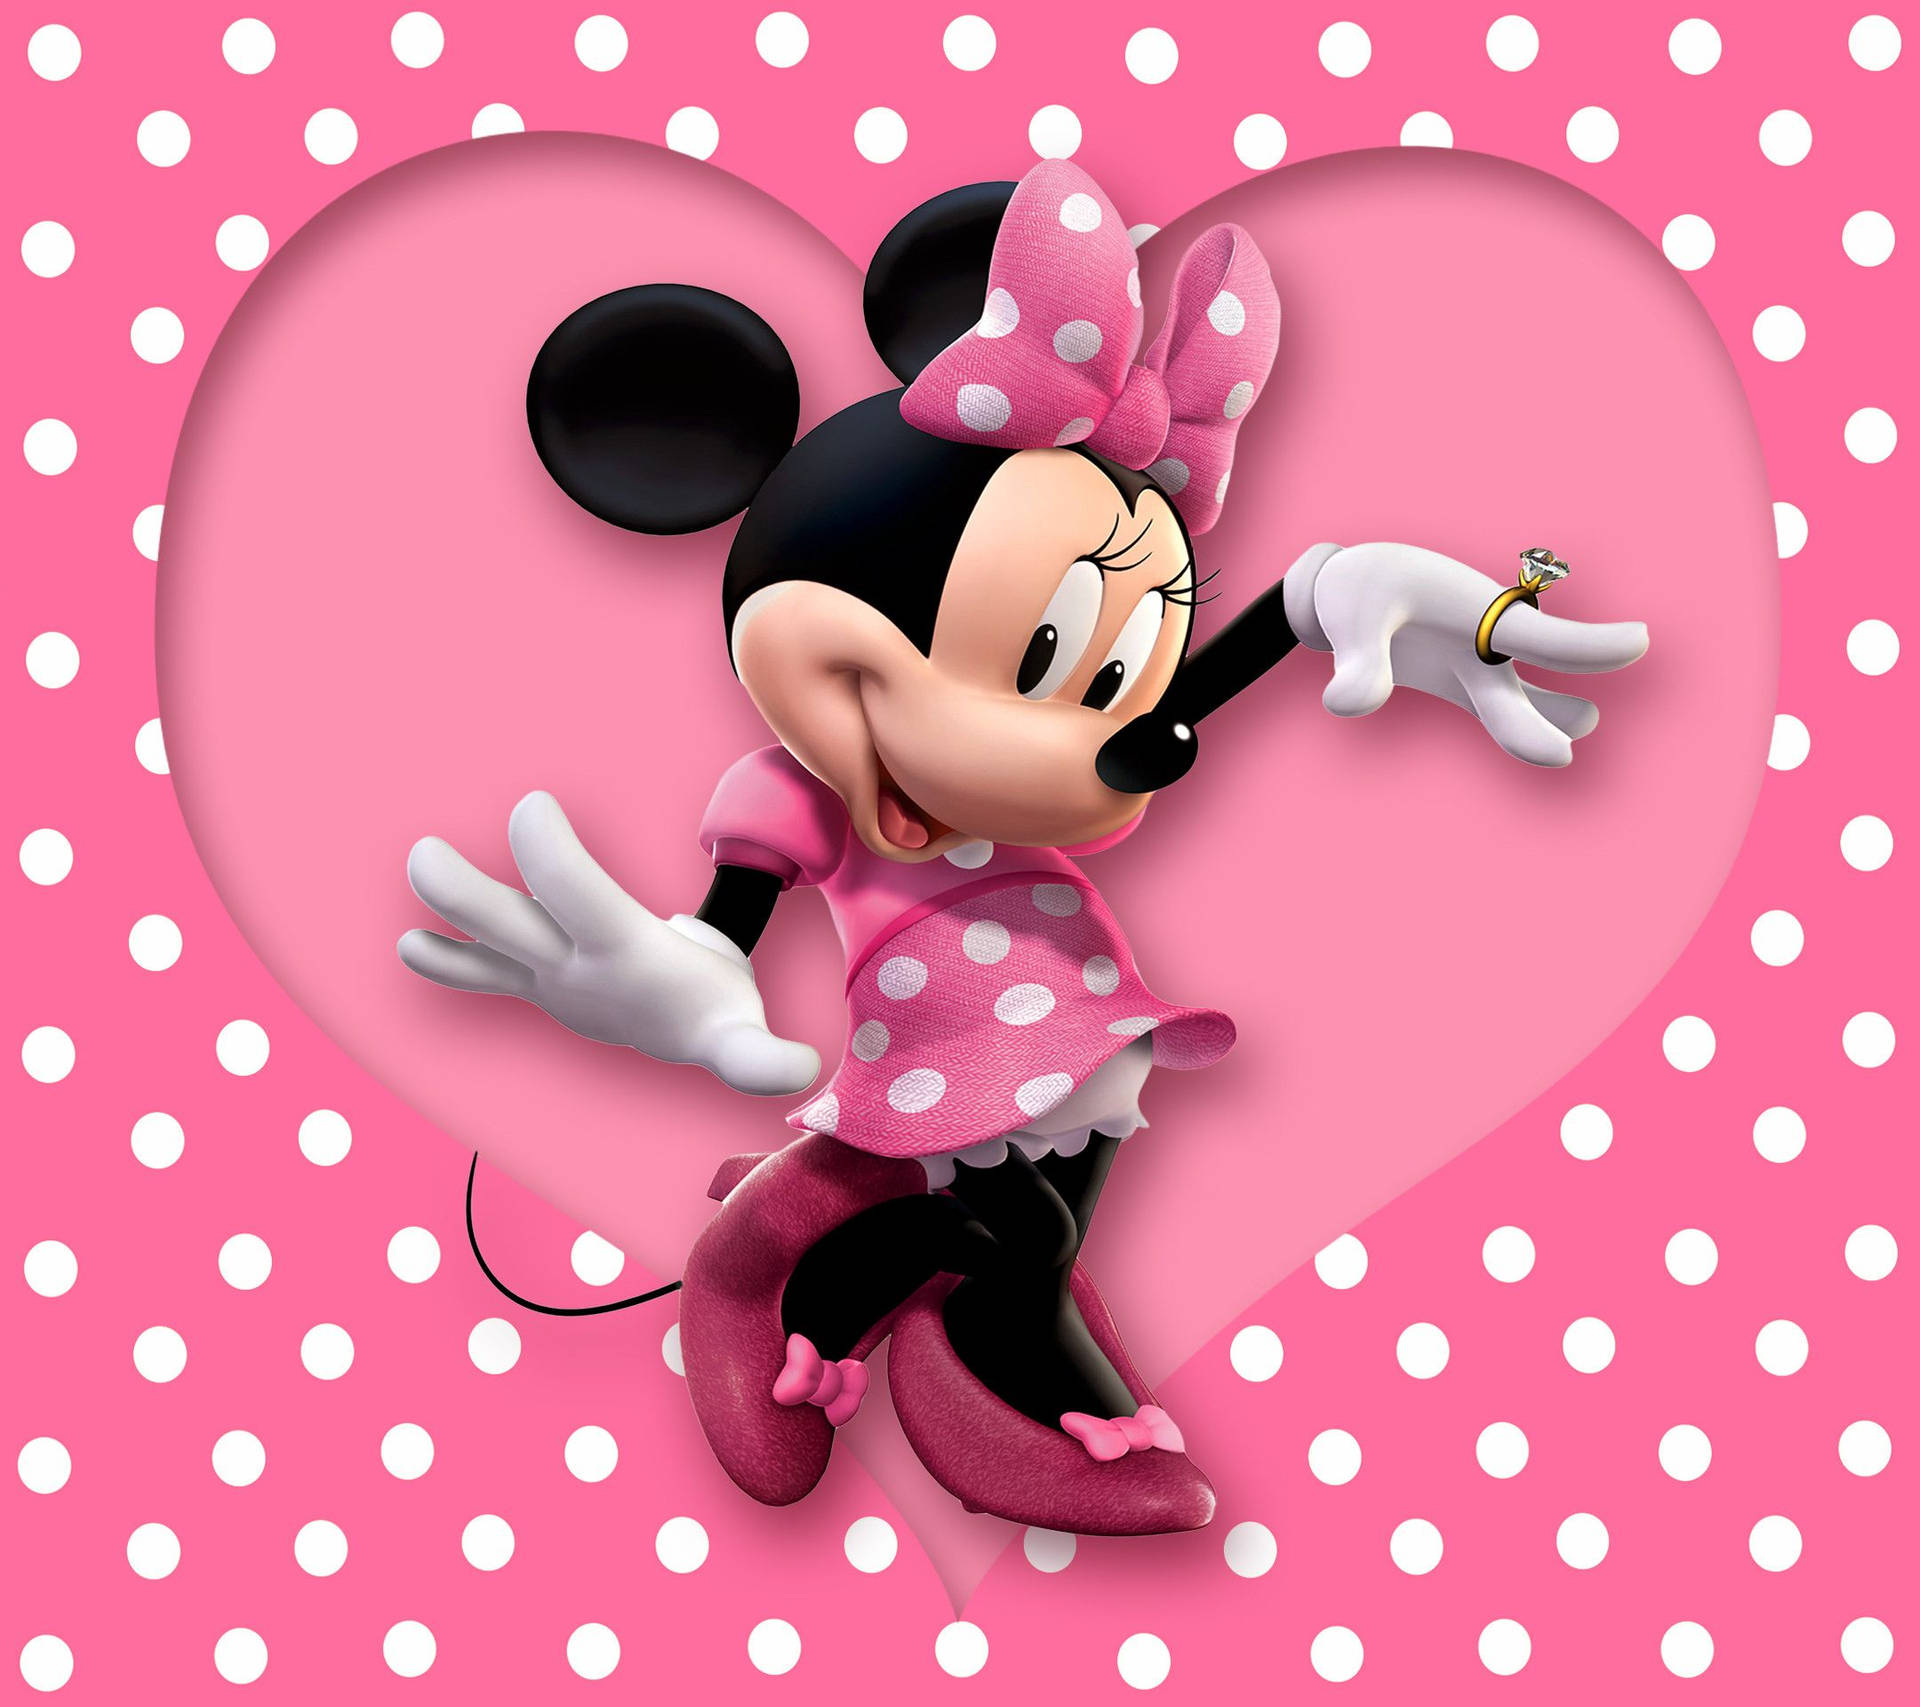 Minnie Mouse Wearing Diamond Ring Background